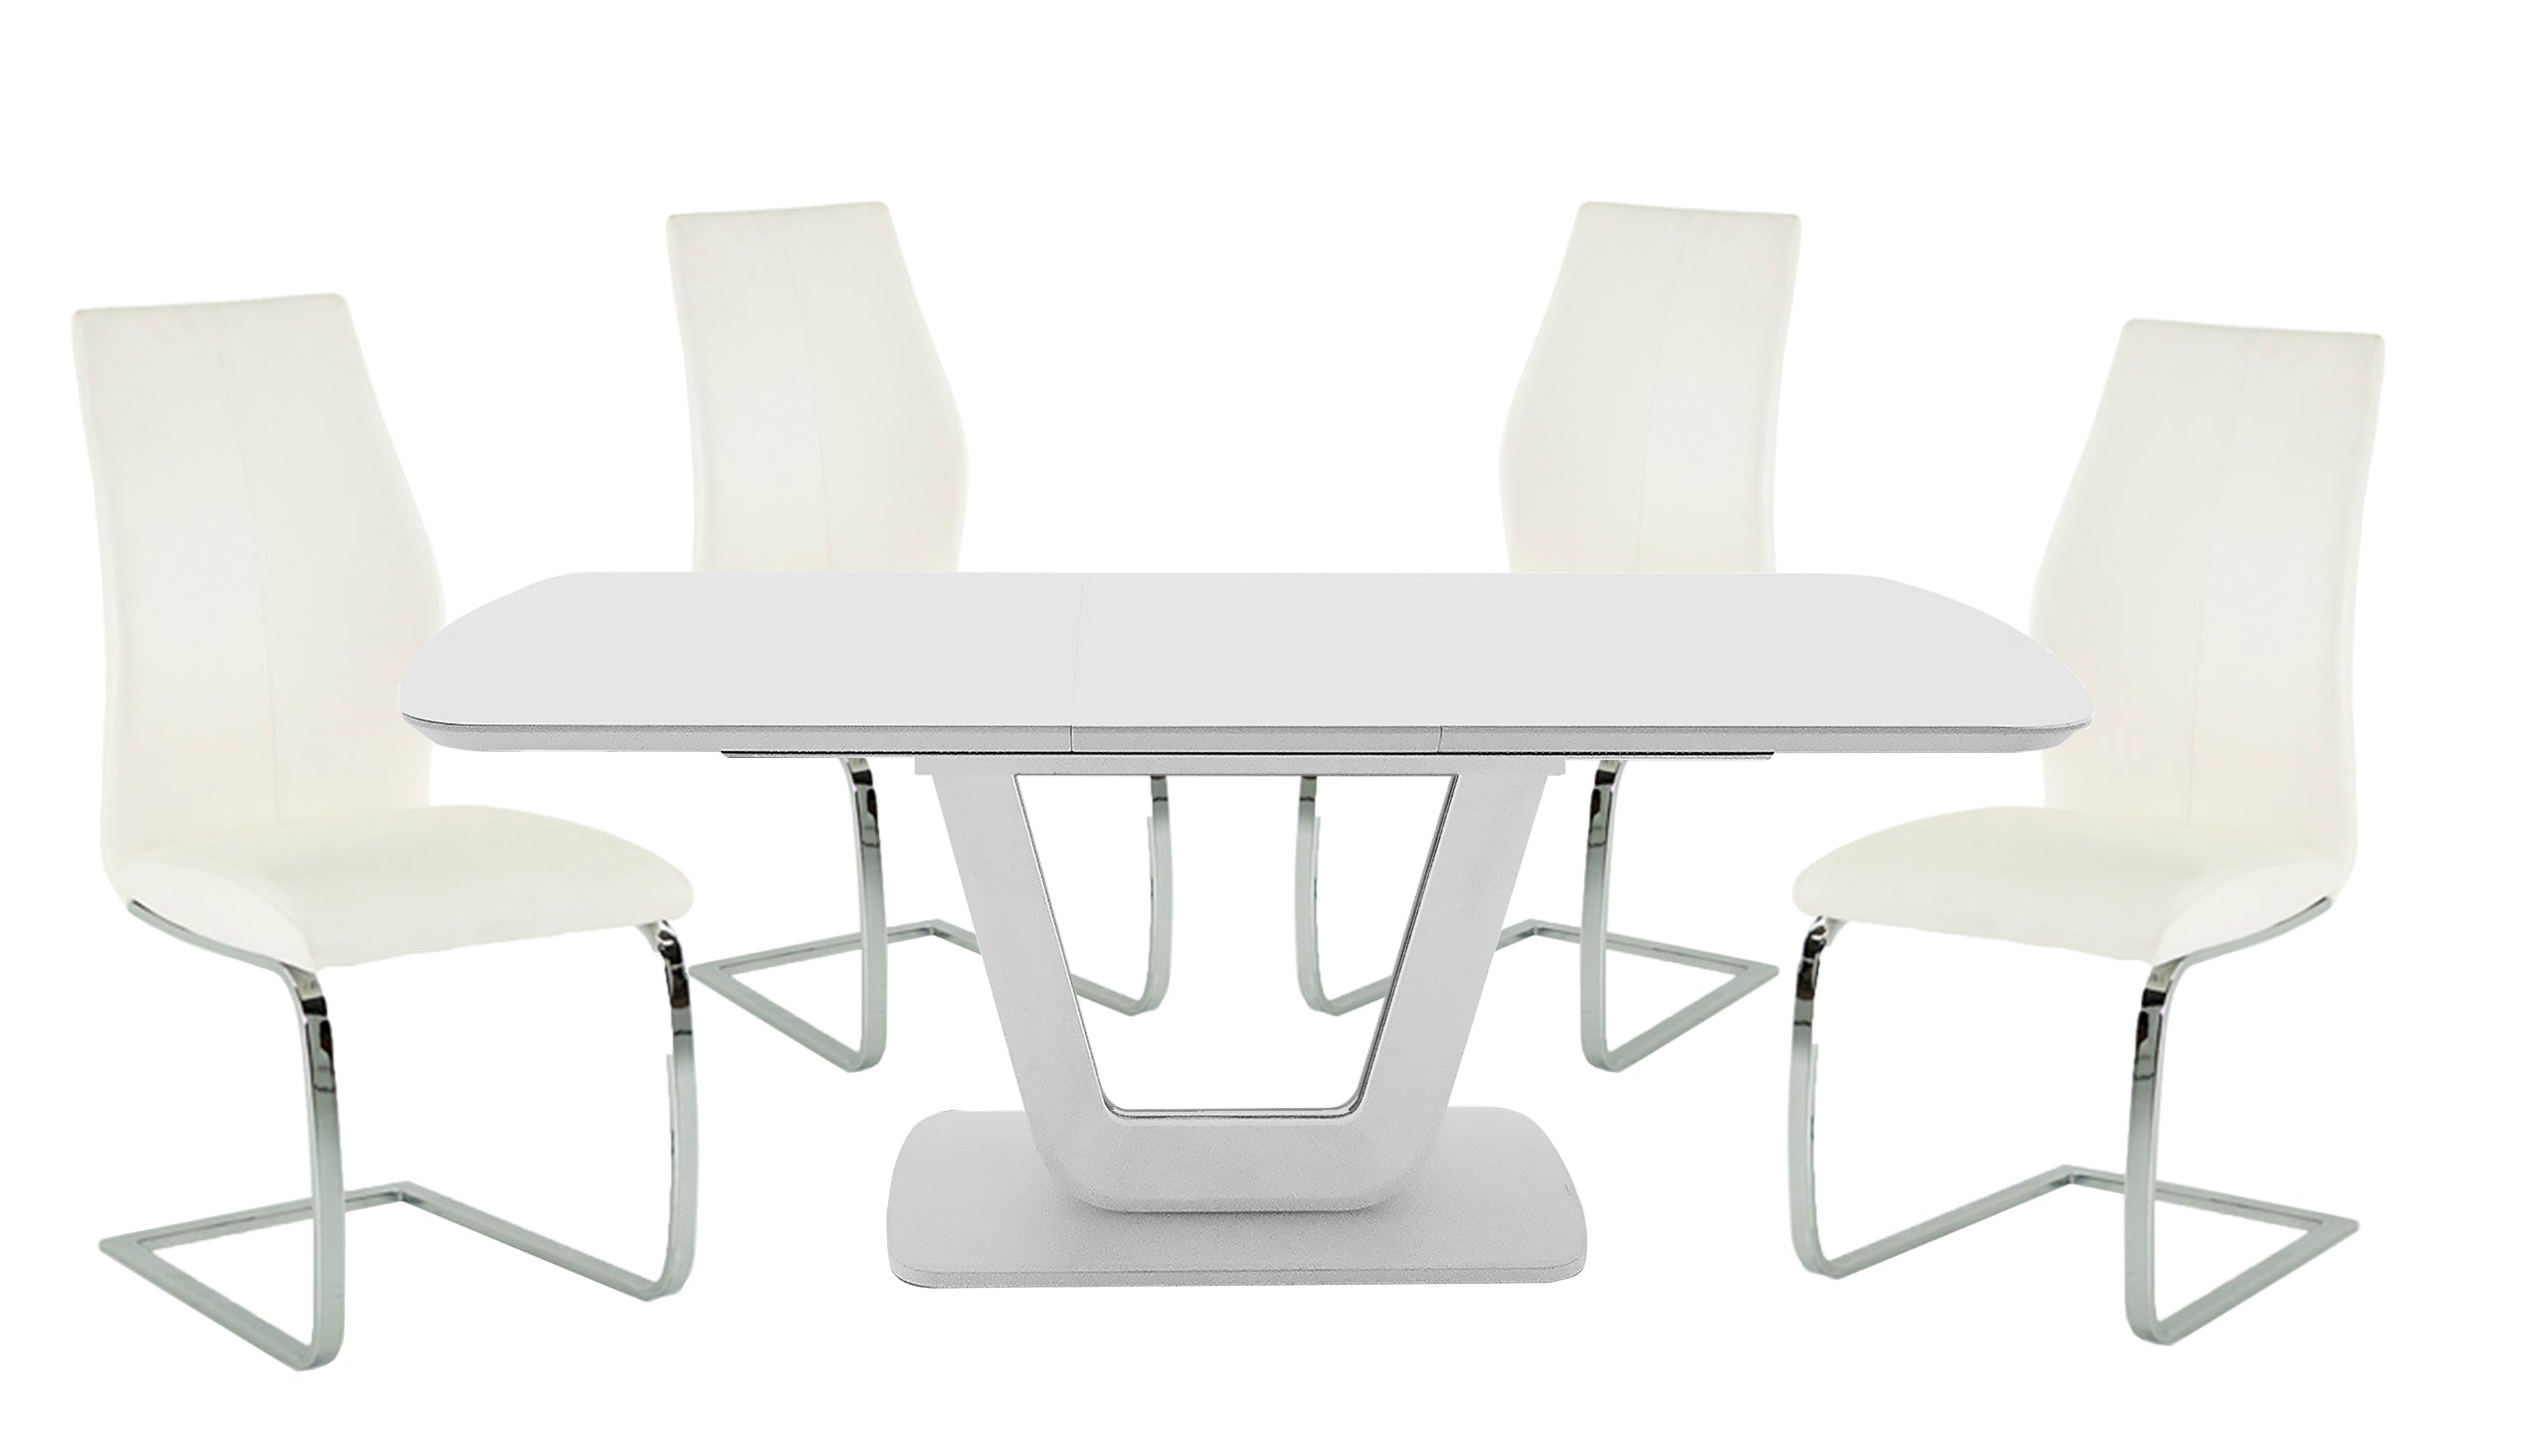 Stockholm 1.6m Extending Dining Table in White with 4 Chairs with Stainless Steel Legs